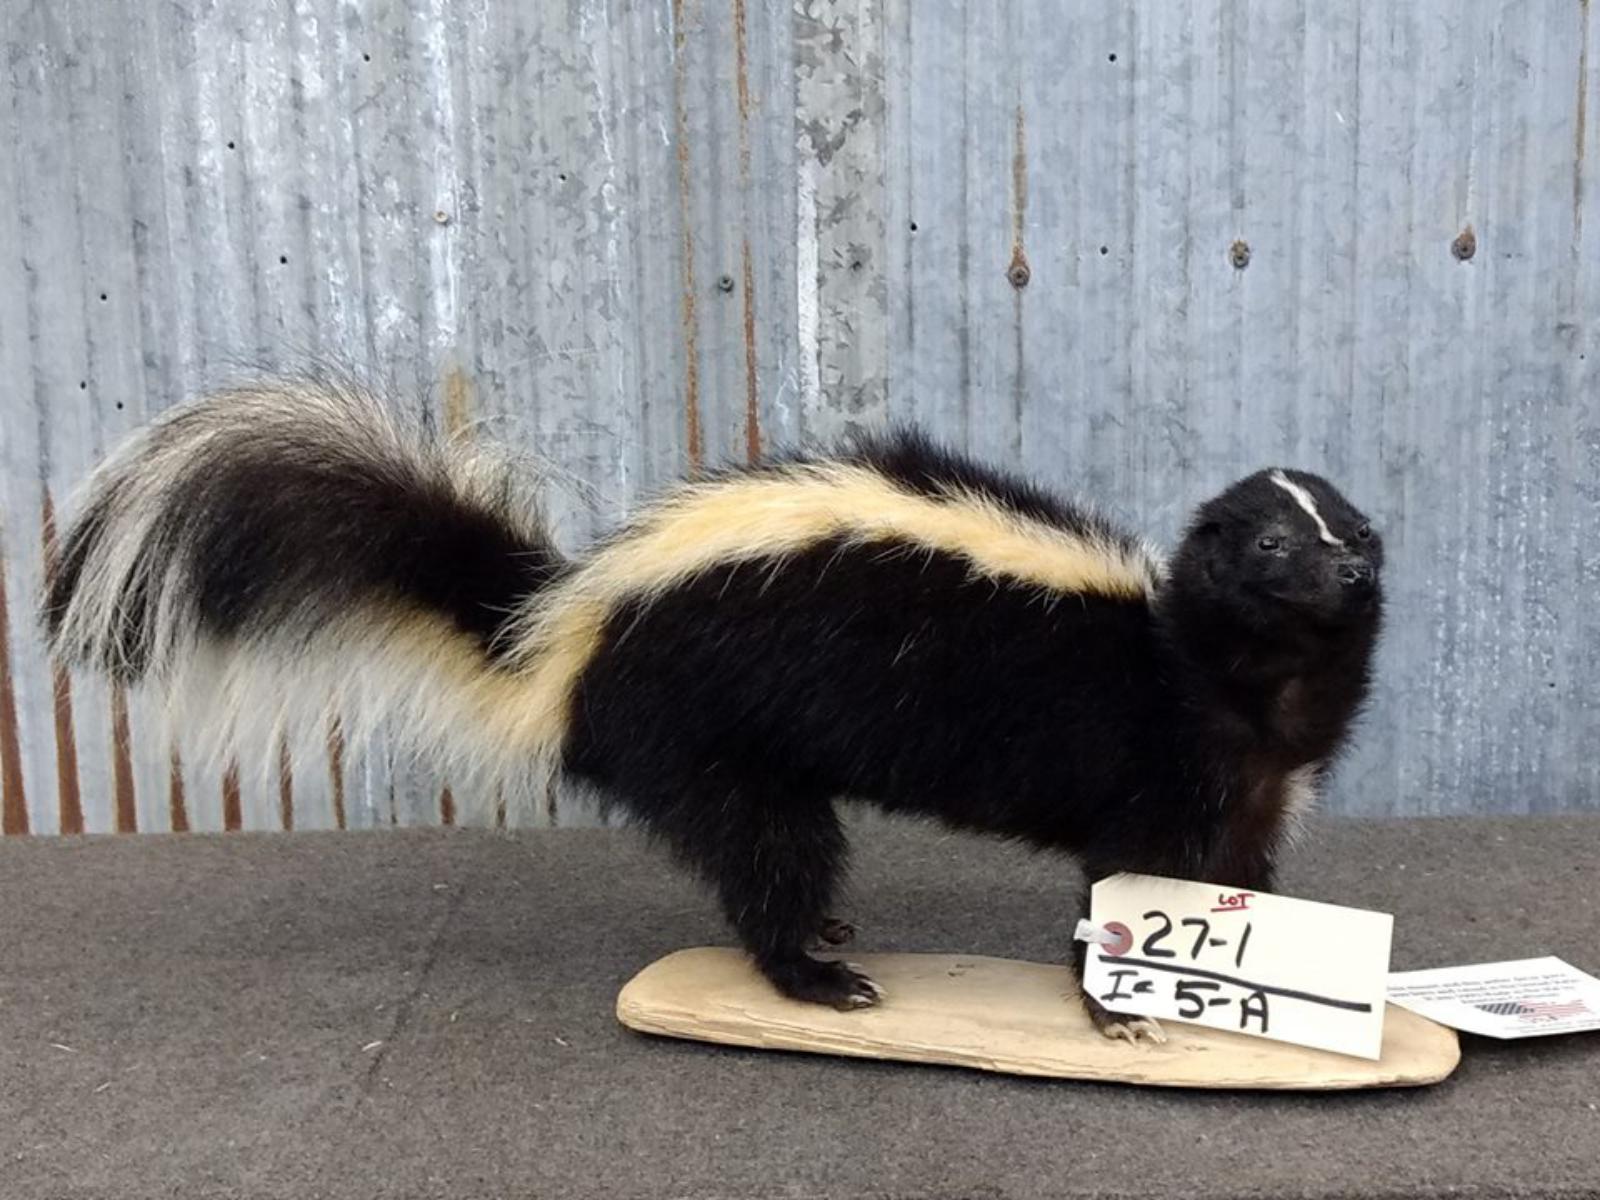 Full Body Mount Skunk New Mount overall dimensions 24" long X 11" tall